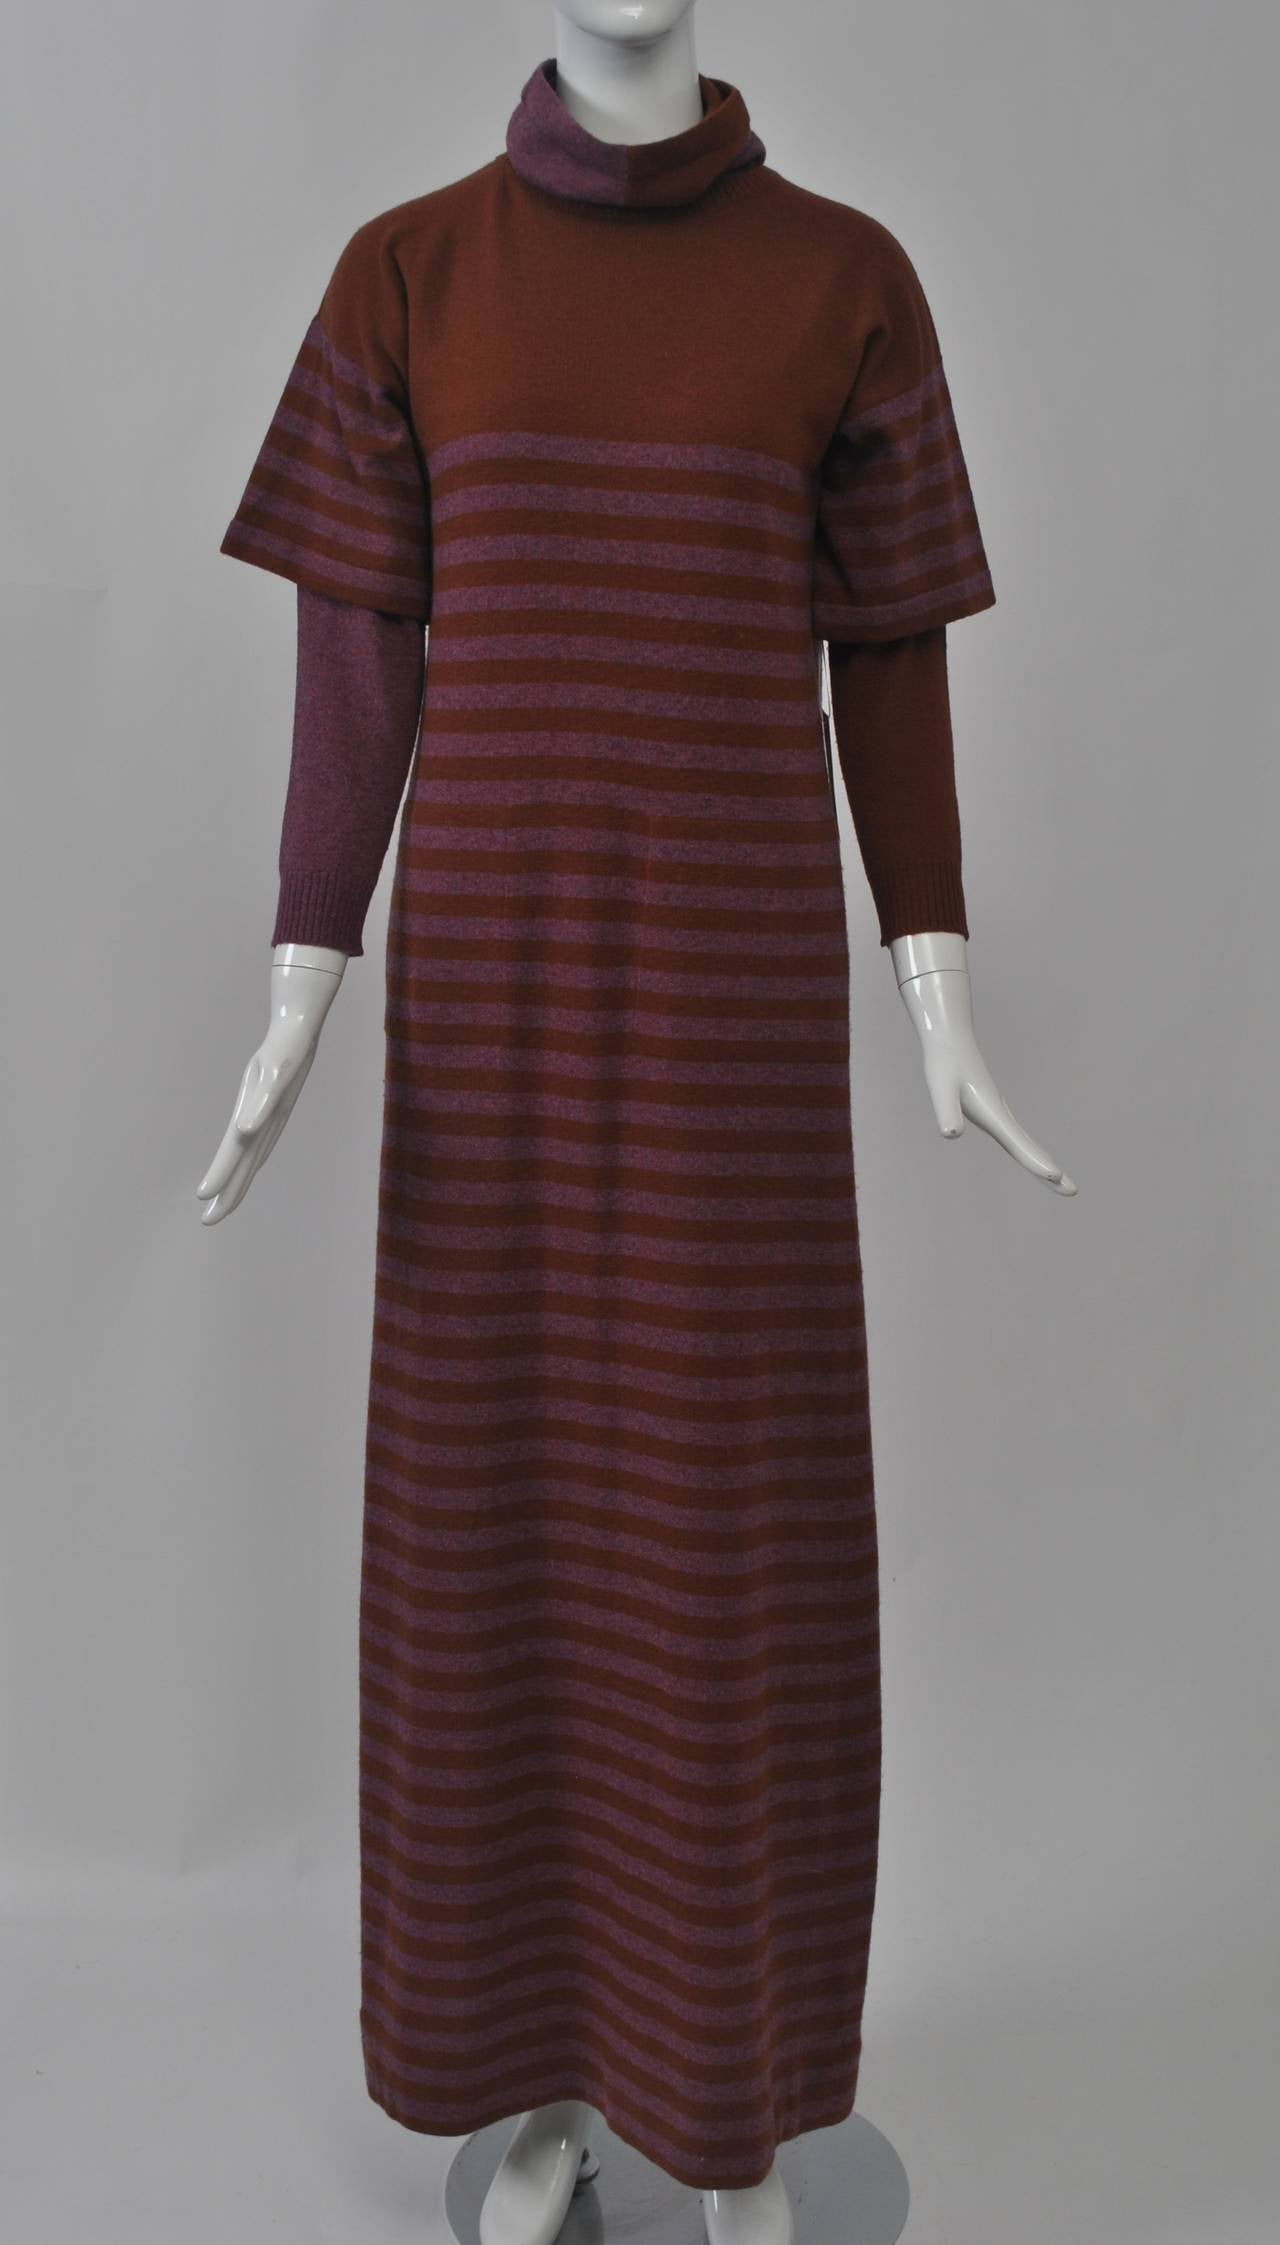 Bonnie Cashin was one of the first designers to cater to women's twentieth-century lifestyles. She wanted her clothes to be easy to wear and easy to travel with. Thus, besides her iconic outerwear and handbag designs, she did a lot of knitwear. This